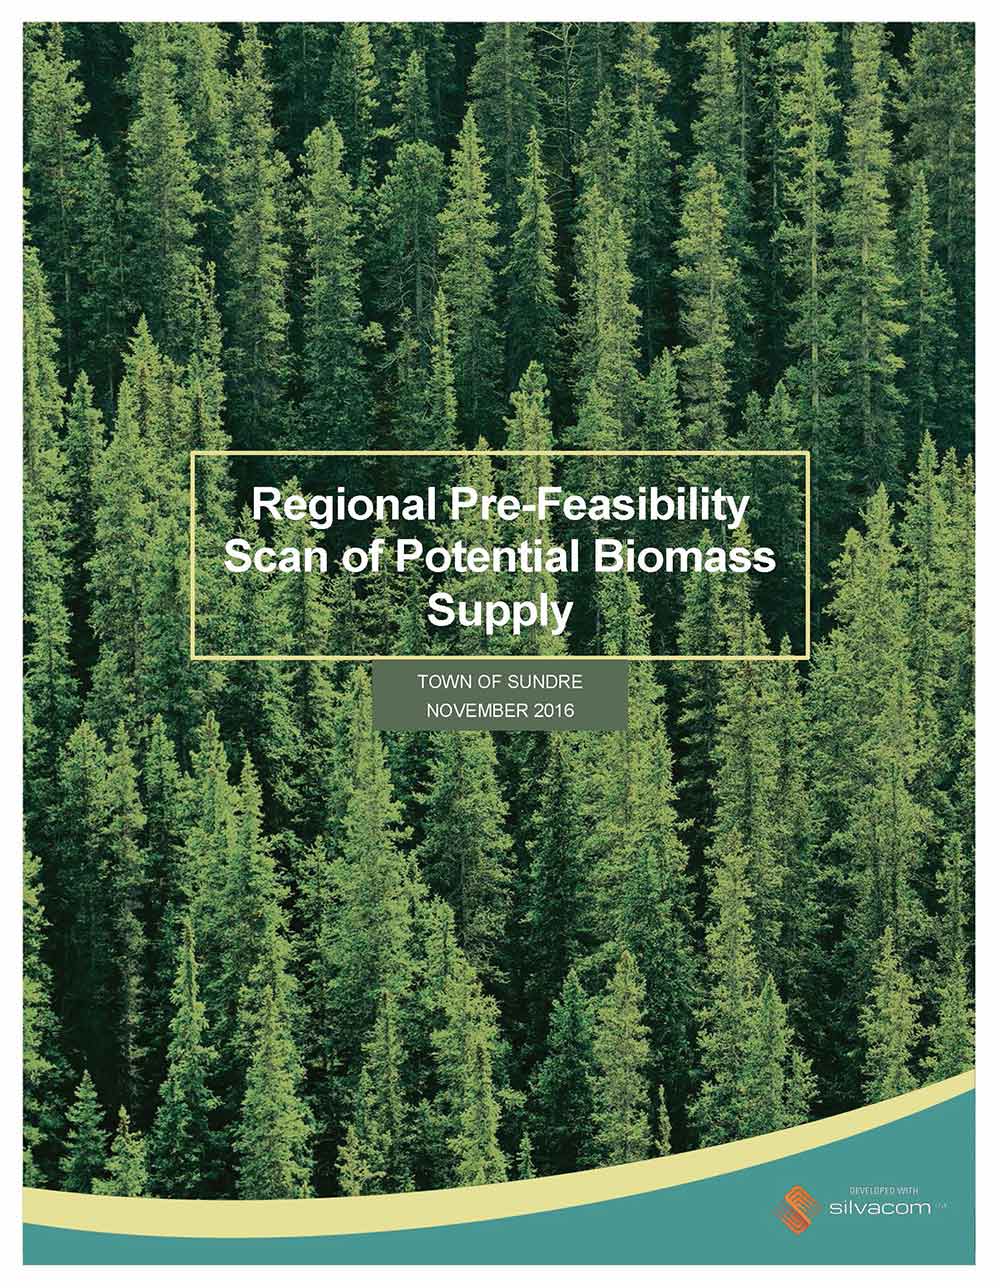 Sundre Regional Pre-Feasibility Scan of Potential Biomass Supply